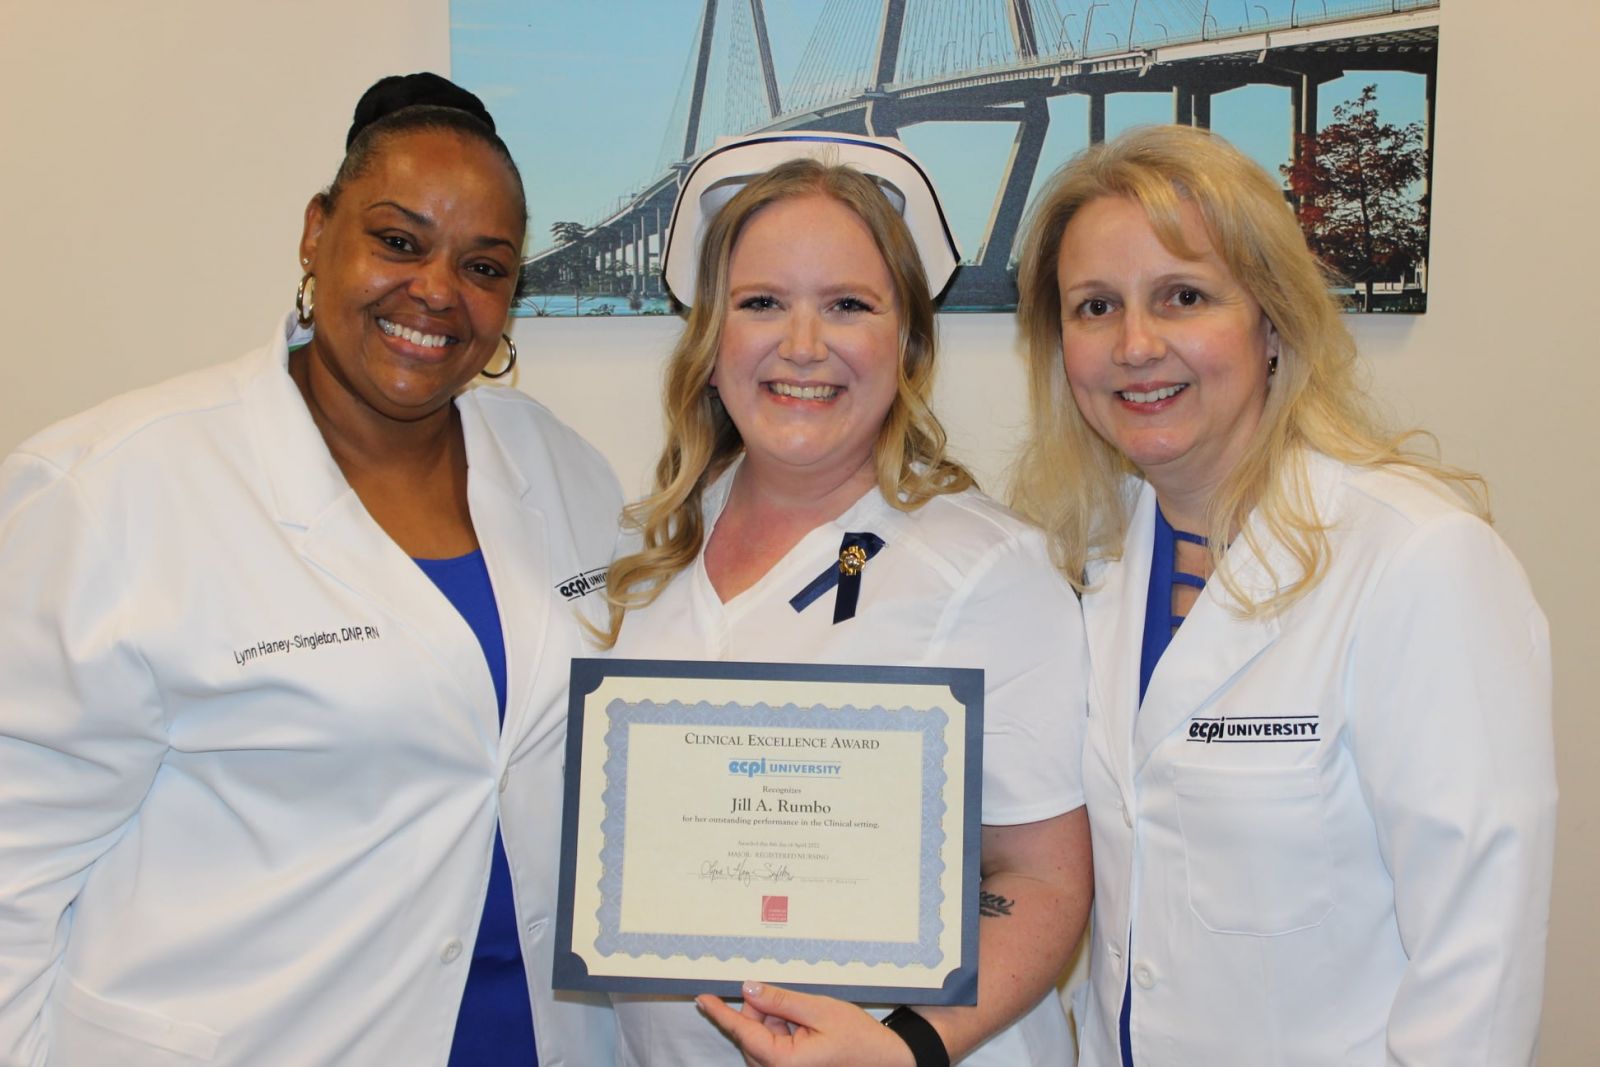 ECPI University will award more than $55,000 in scholarships across its 14 campuses with nursing programs in celebration of National Nurses Week. (Photo/Provided)